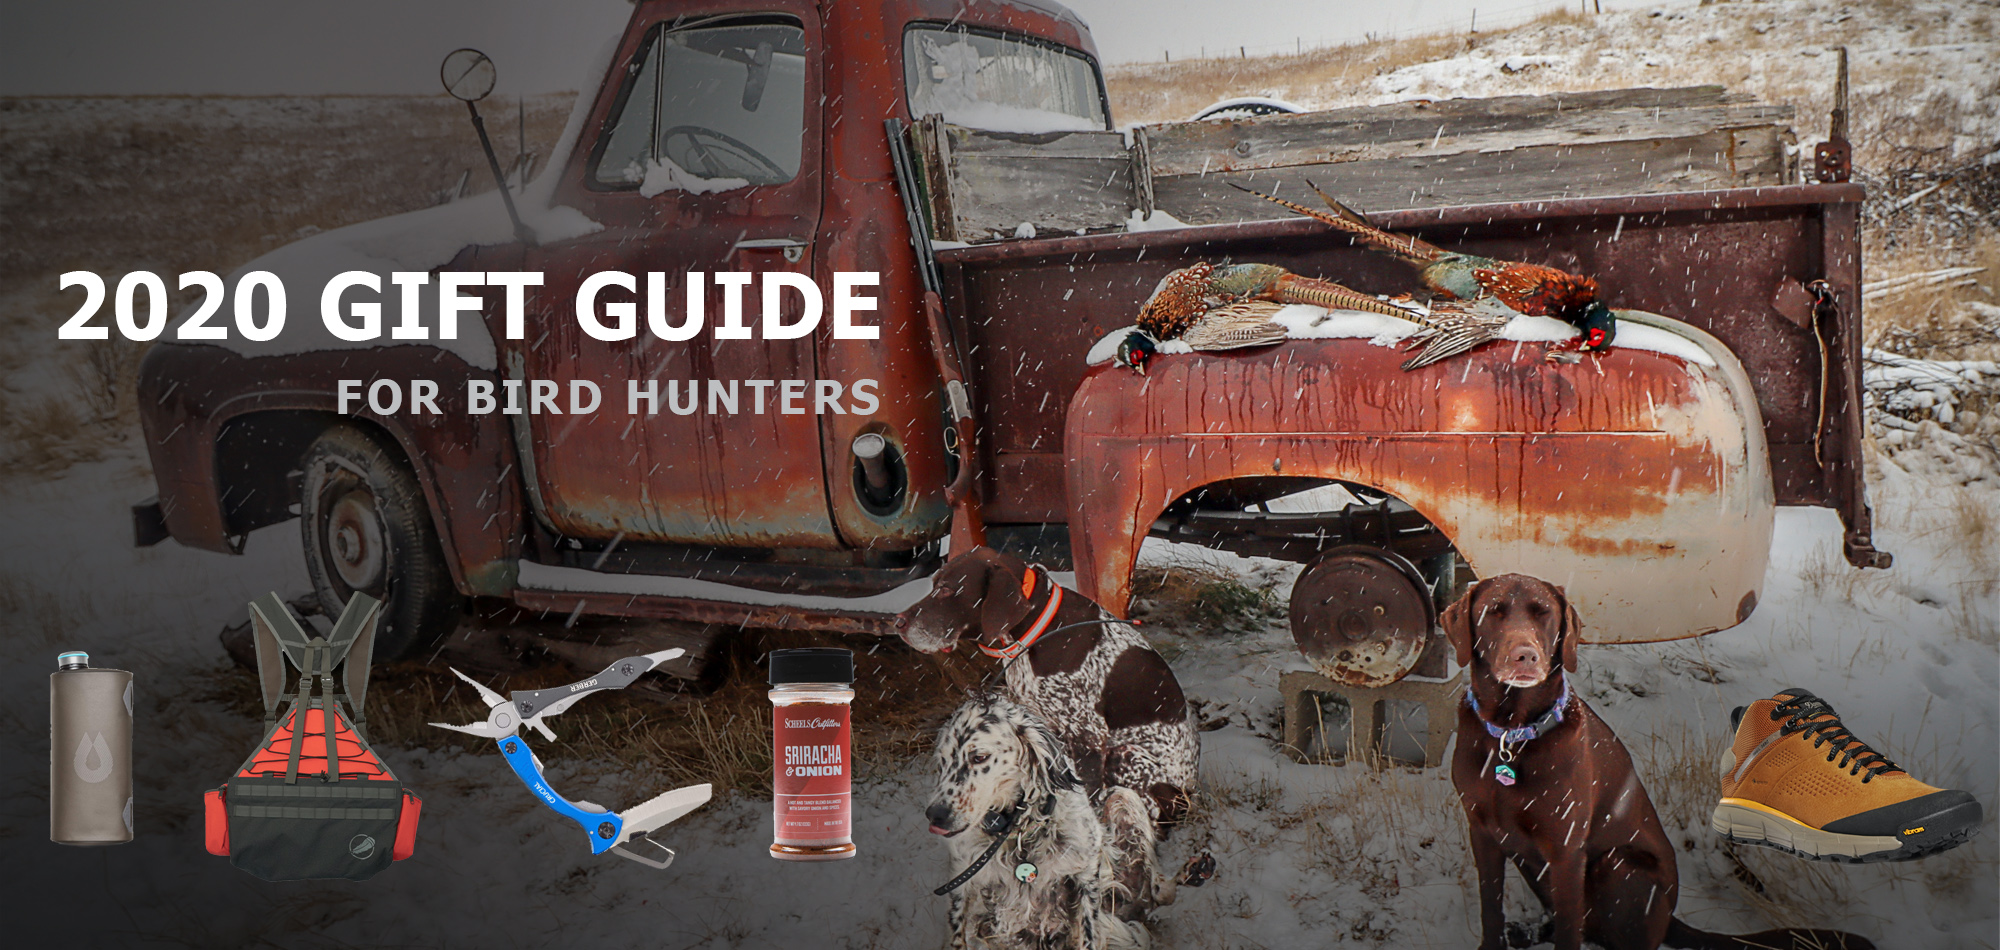 2020 Gift Guide for Bird Hunters